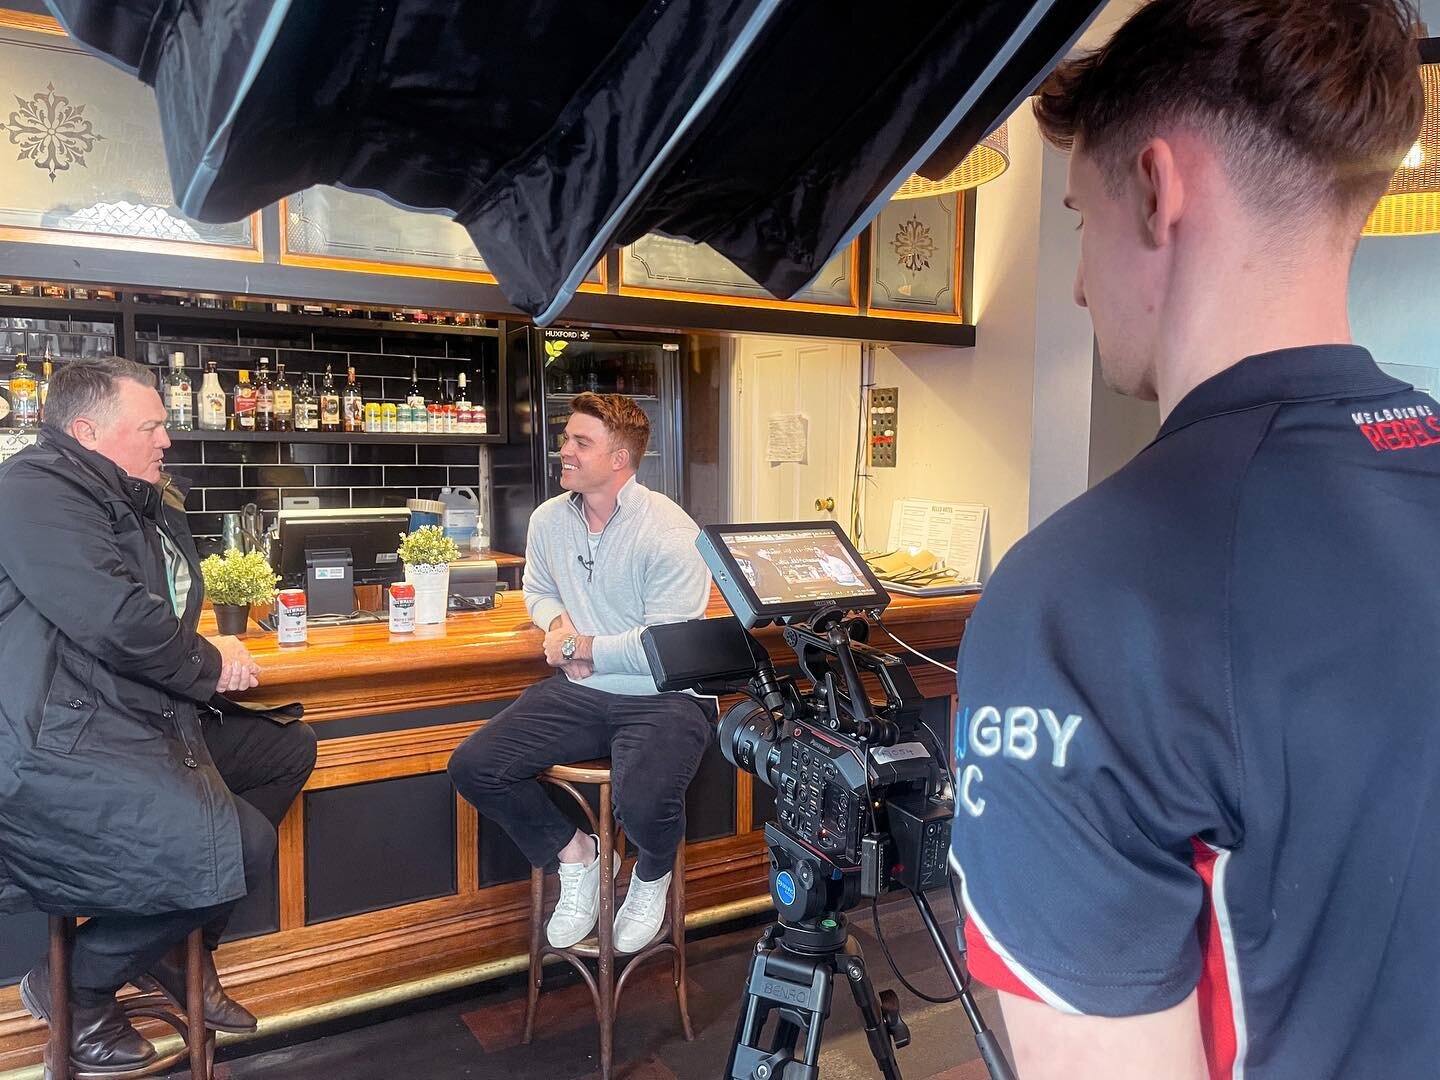 Behind the scenes of an exciting new project we&rsquo;re working on with @brewmanity and @melbournerebels 🎥 Stay tuned 🍻 

#Melbourne #videoproduction #marketing #events #melbournemarketing #melbournevenues